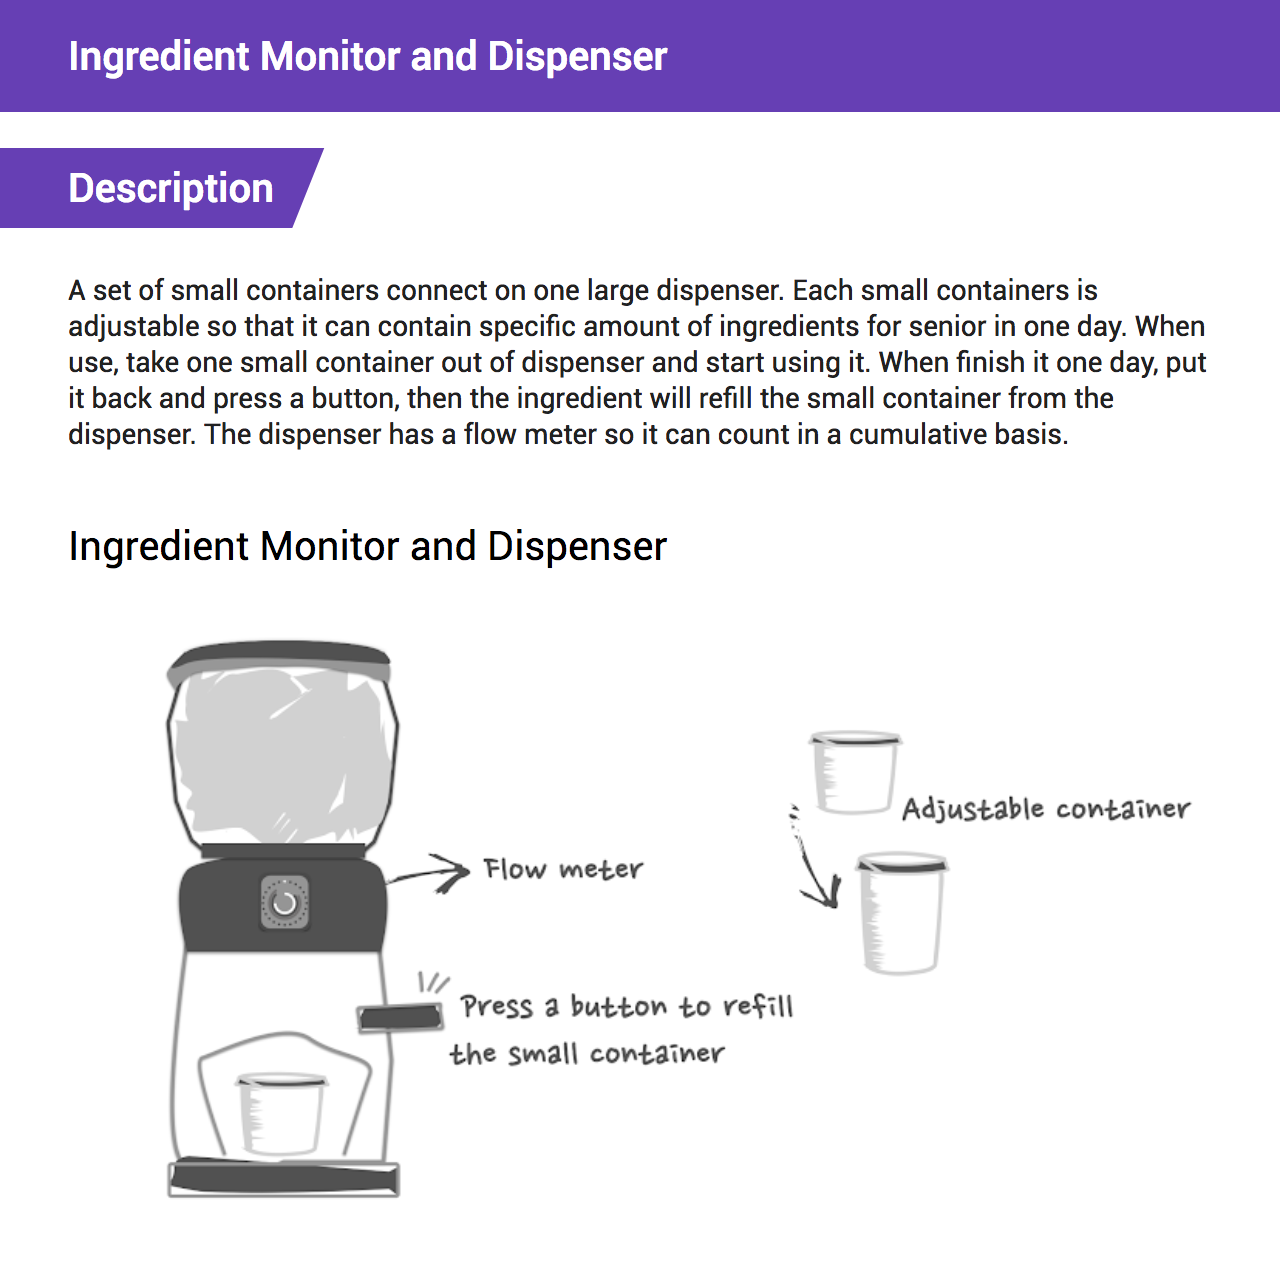 Ingredient Monitor and Dispenser